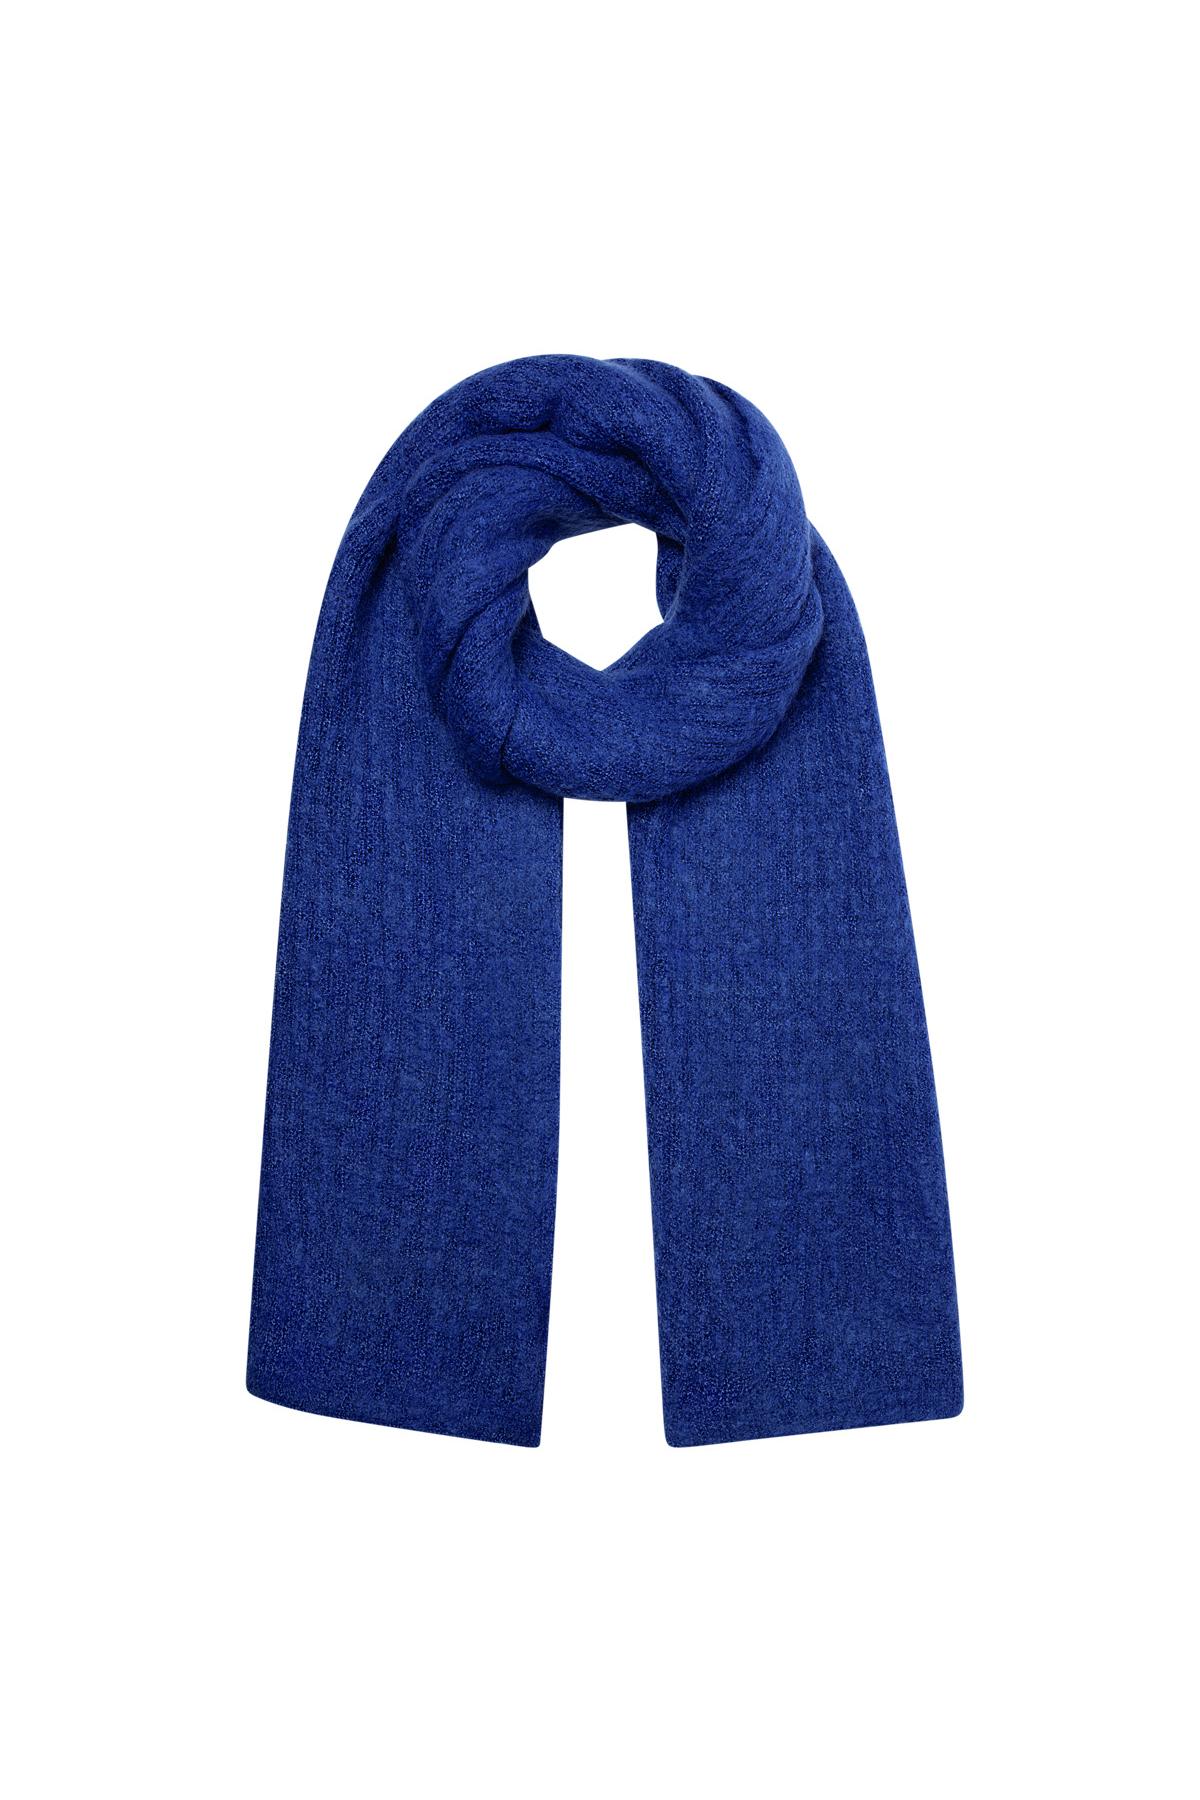 Scarf knitted plain - blue h5 